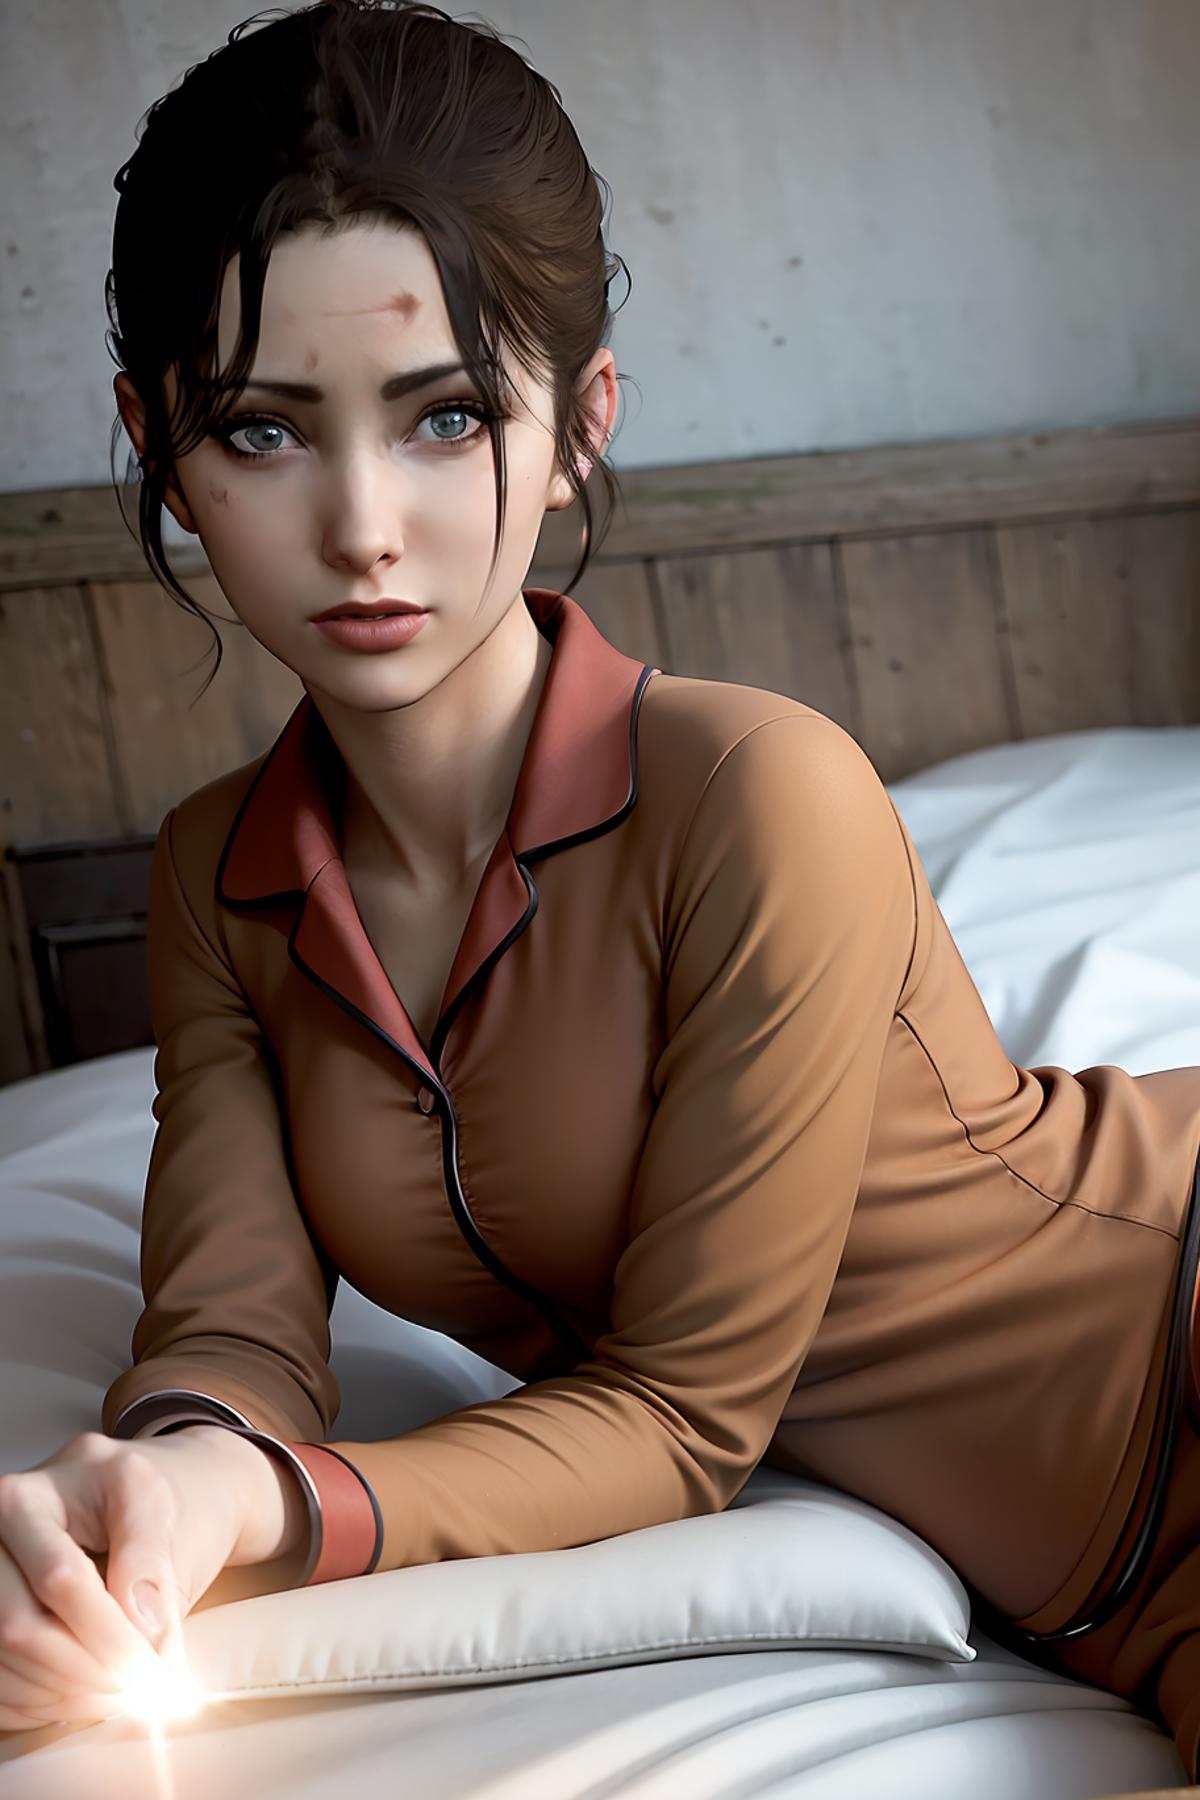 zoey-Left 4 Dead 求生之路-左伊 image by lsl2315009857